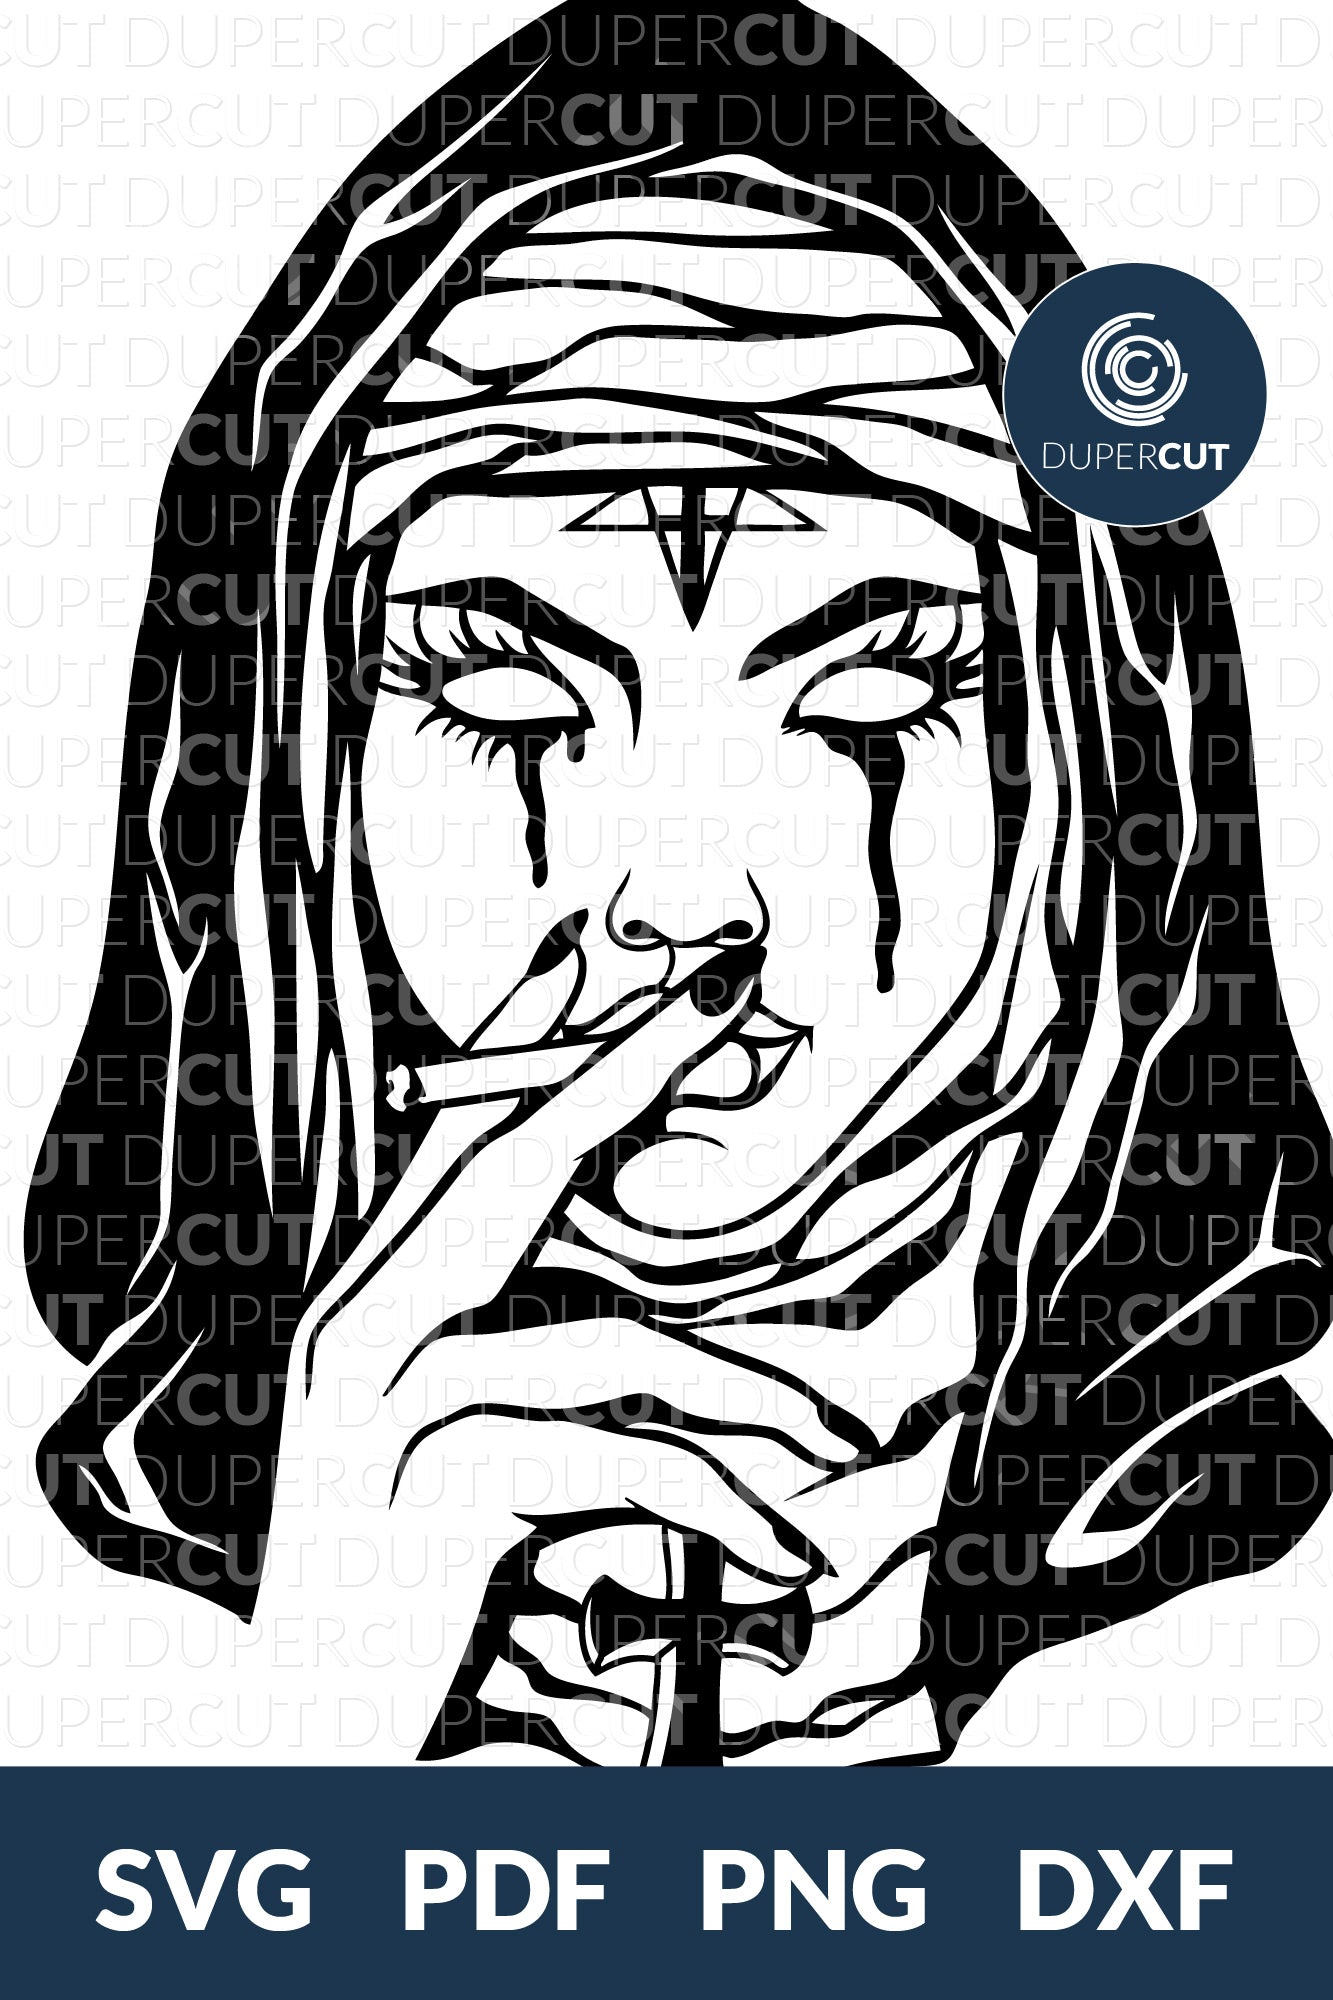 Sinful Nun line drawing, SVG PNG DXF cutting files, for print on demand, sublimation, vinyl, commercial use by DuperCut